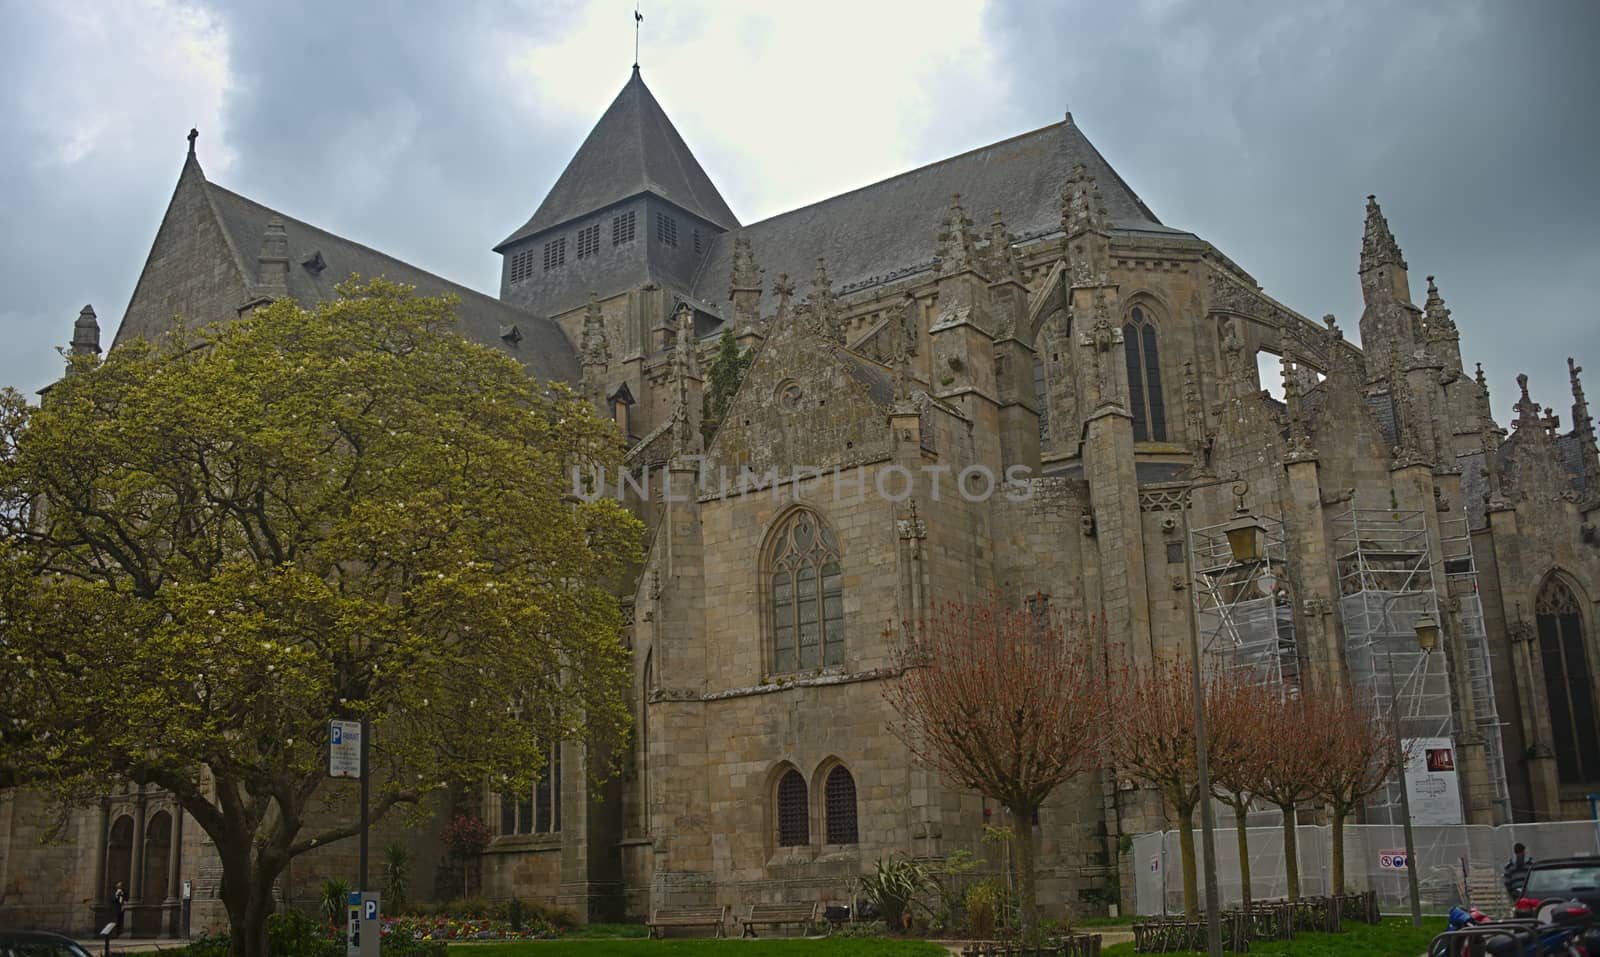 Huge old medieval stone catholic church in Dinan, France